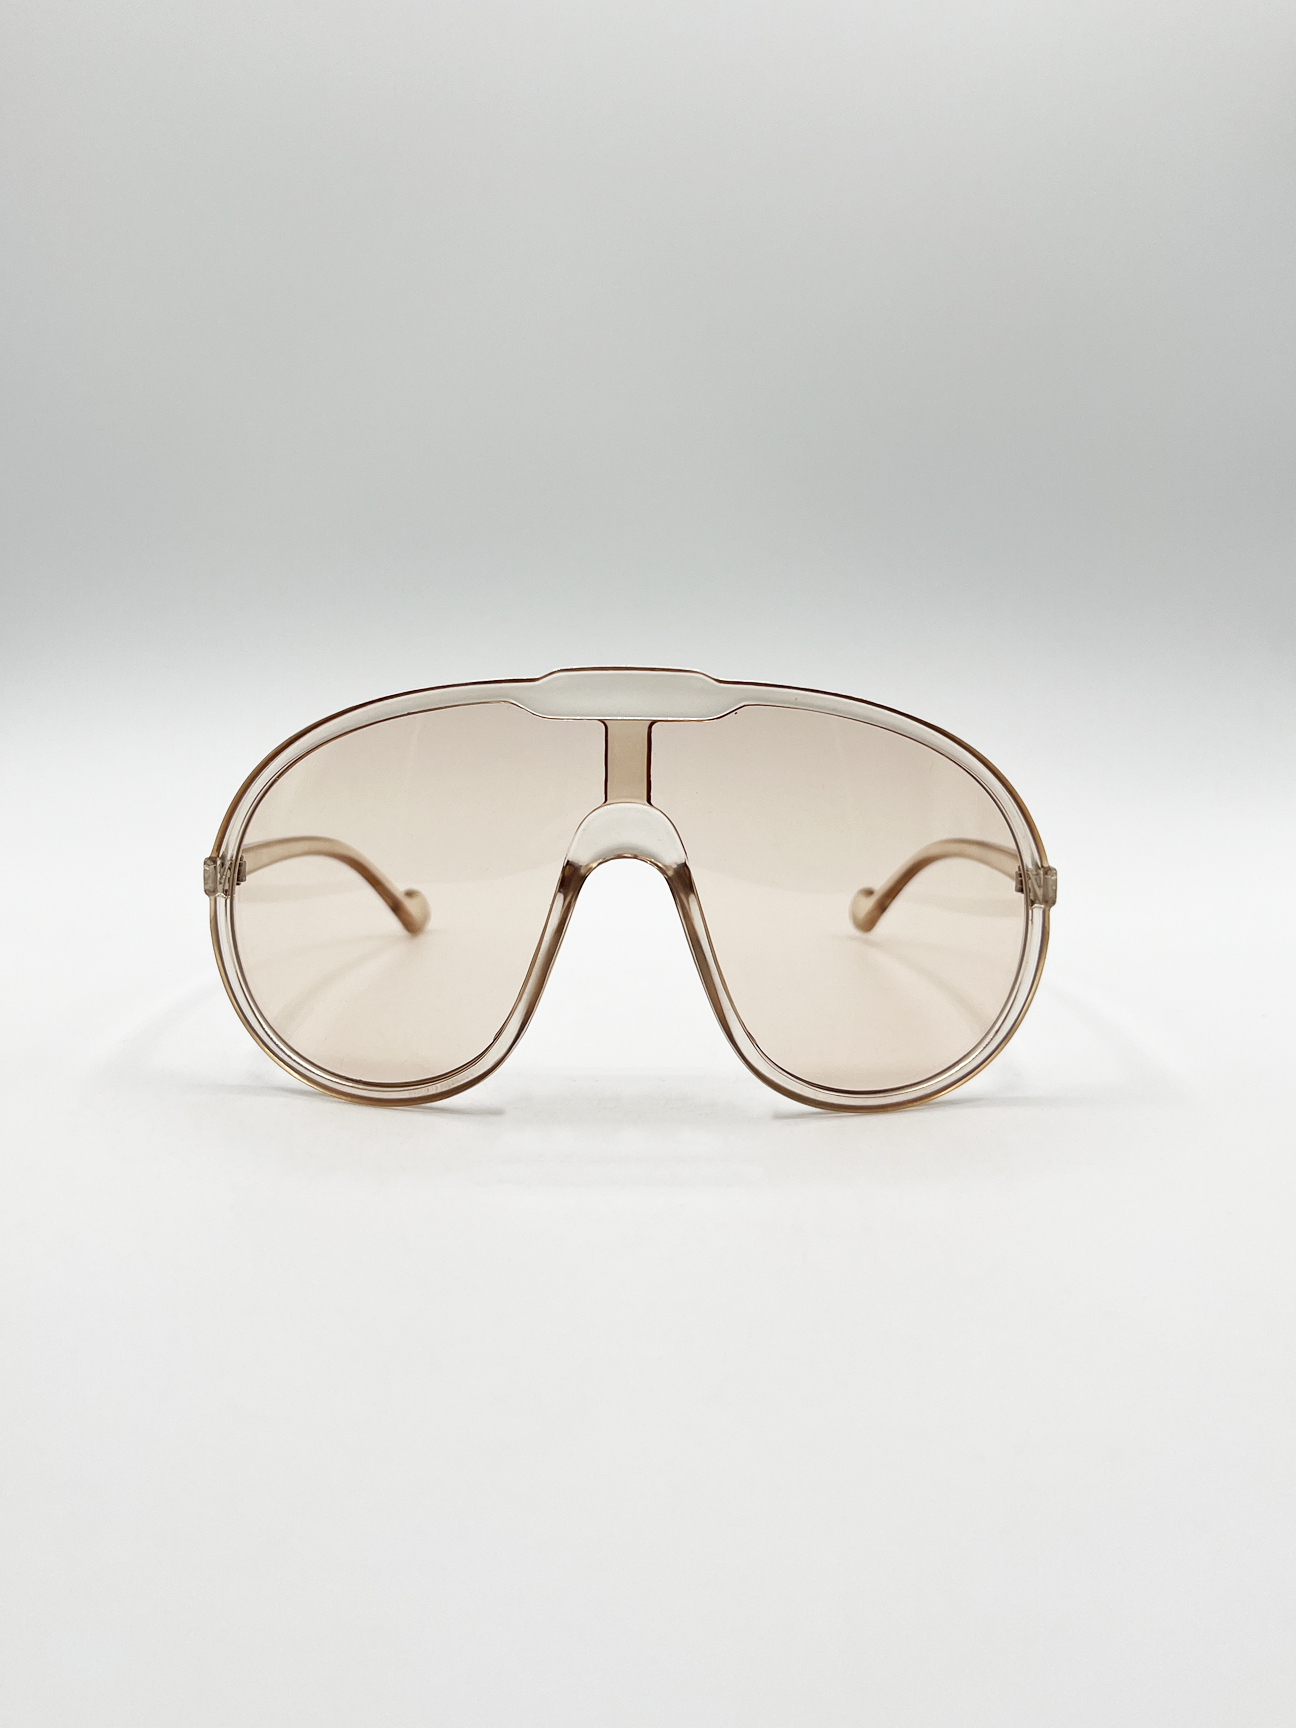 Wave Mask Sunglasses in Champagne